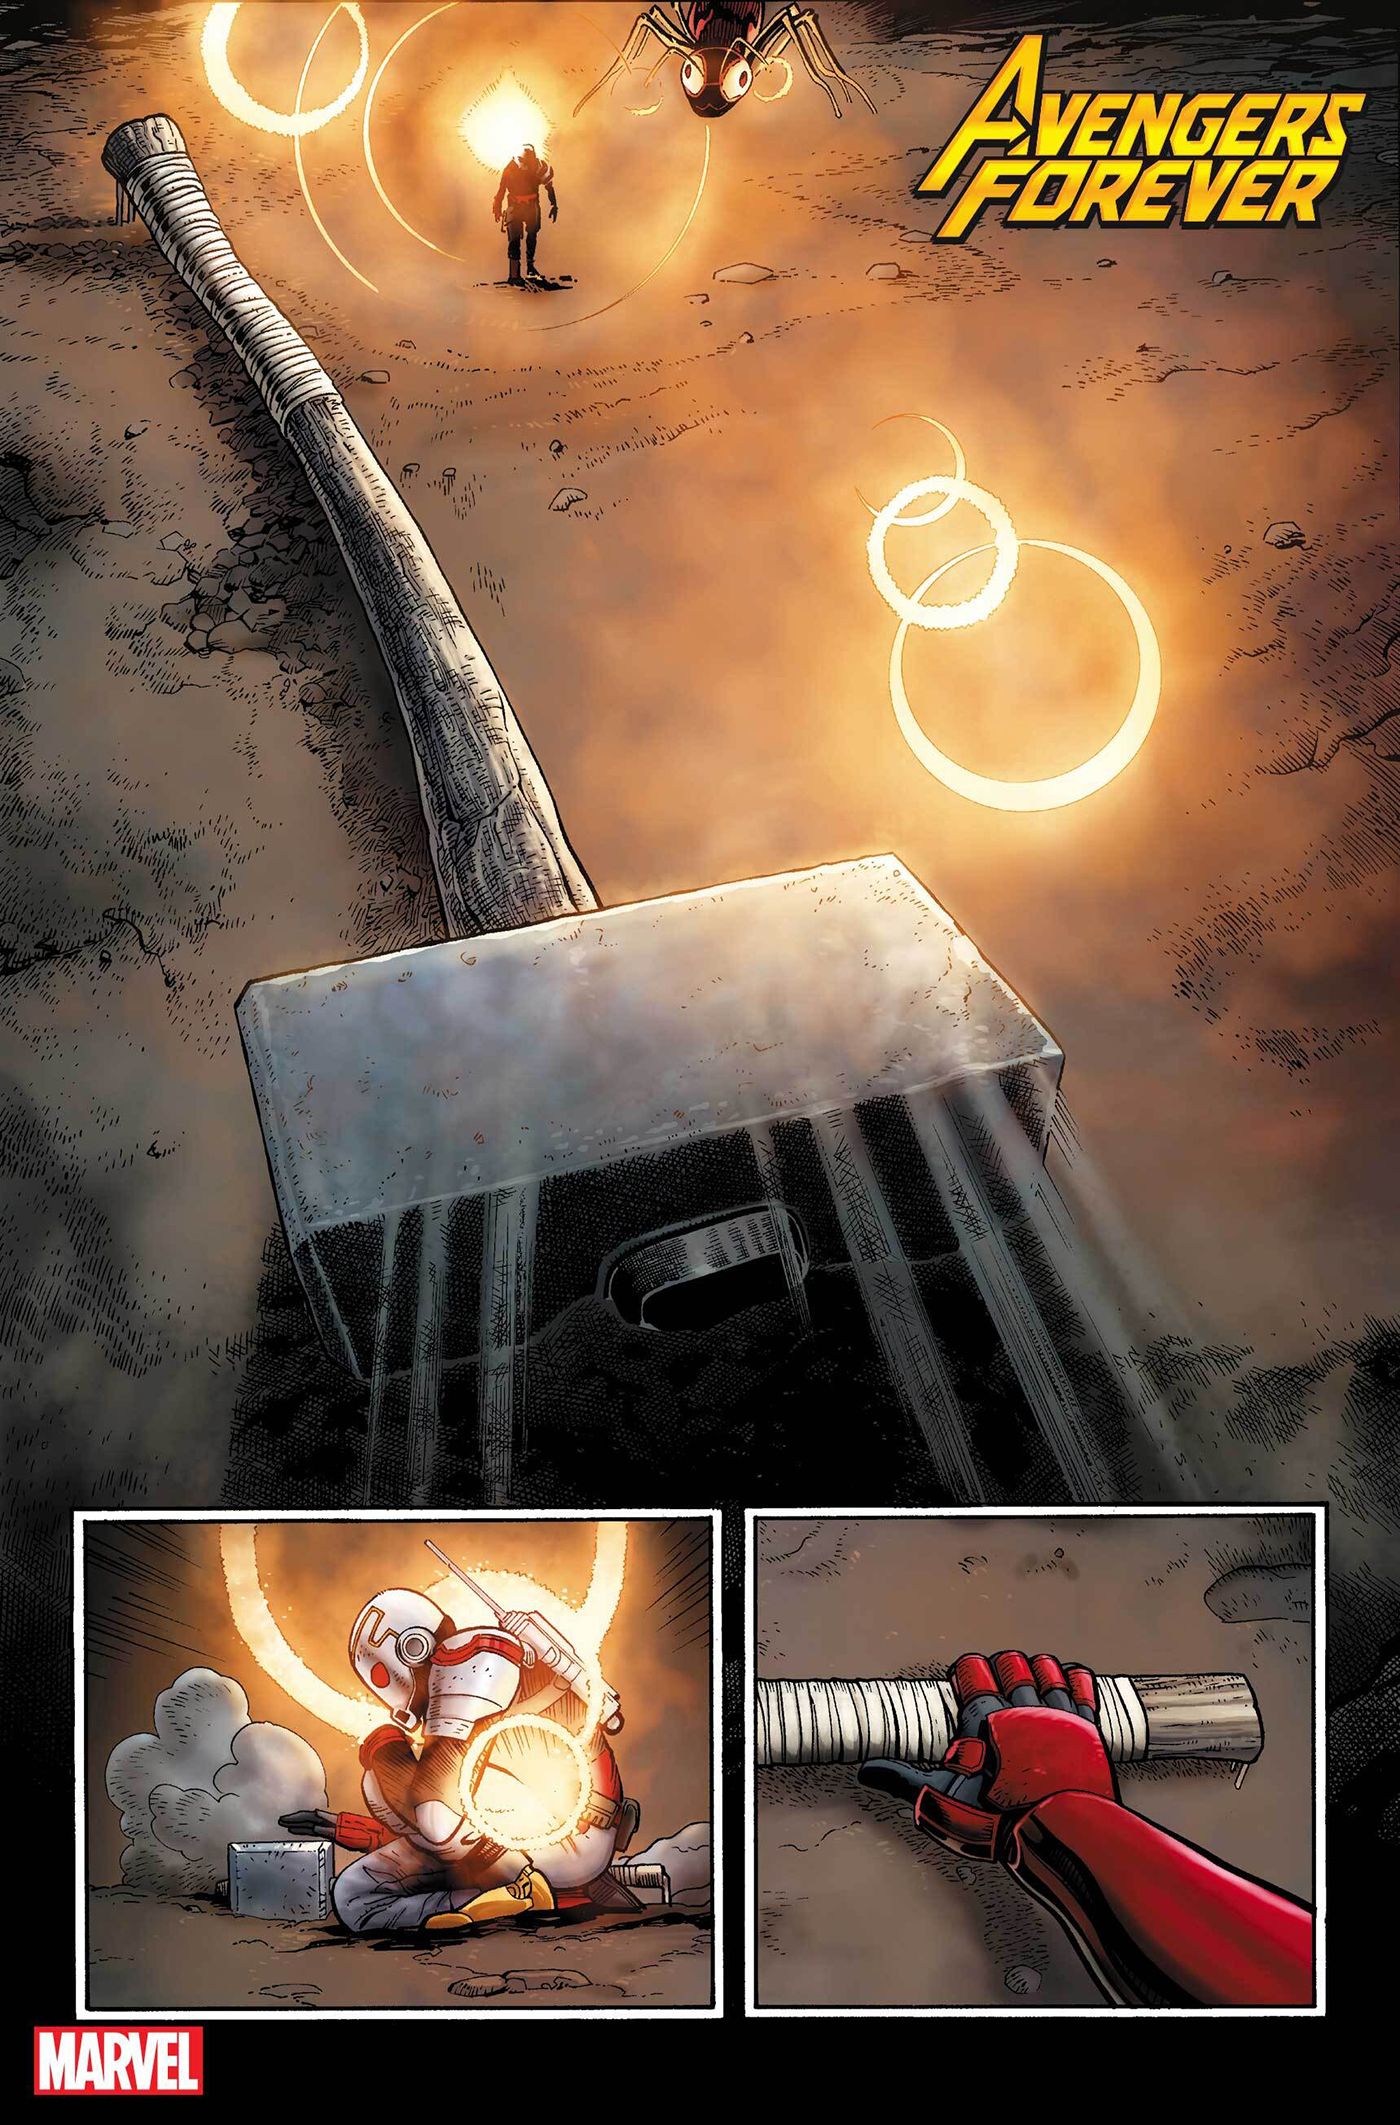 Ant-Man comes across Thor's hammer and reaches to lift it.